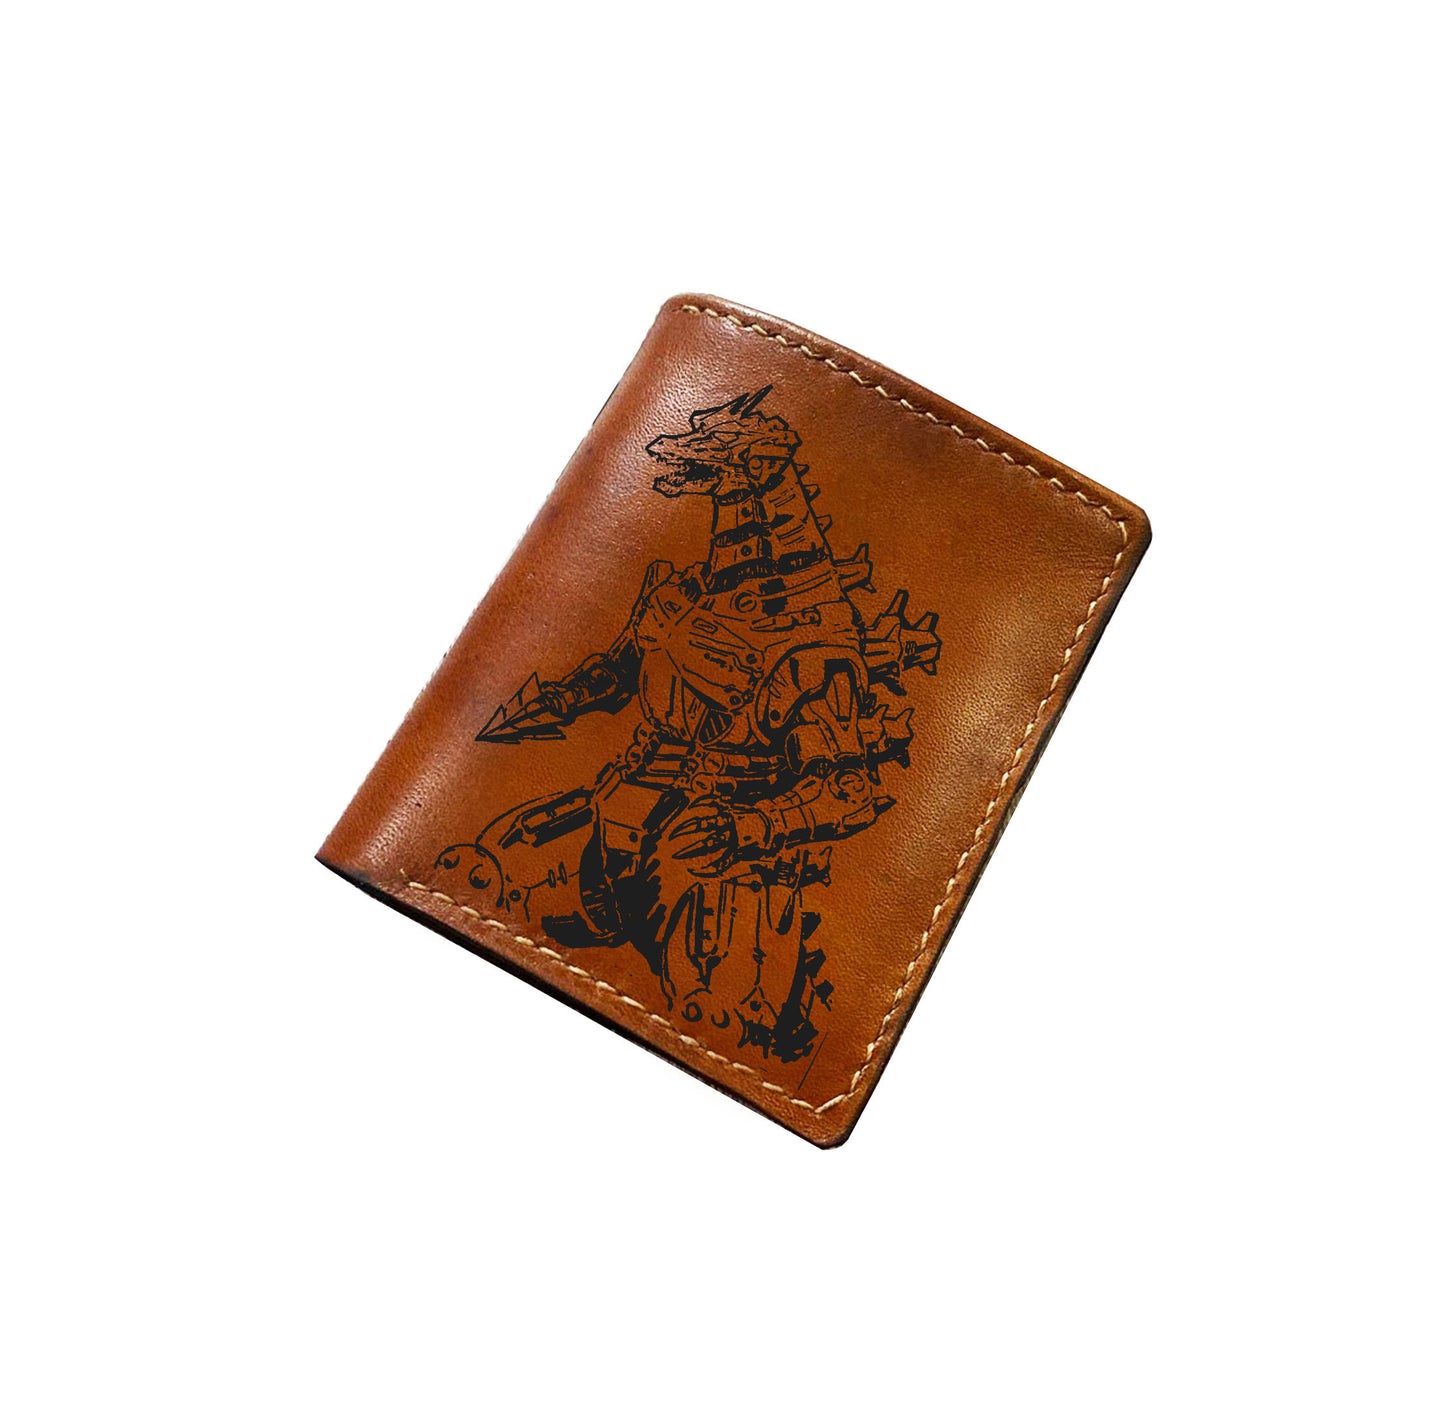 Mayan Corner - Classic Godzilla painting leather wallet, customized wallet for him, christmas leather present ideas for men